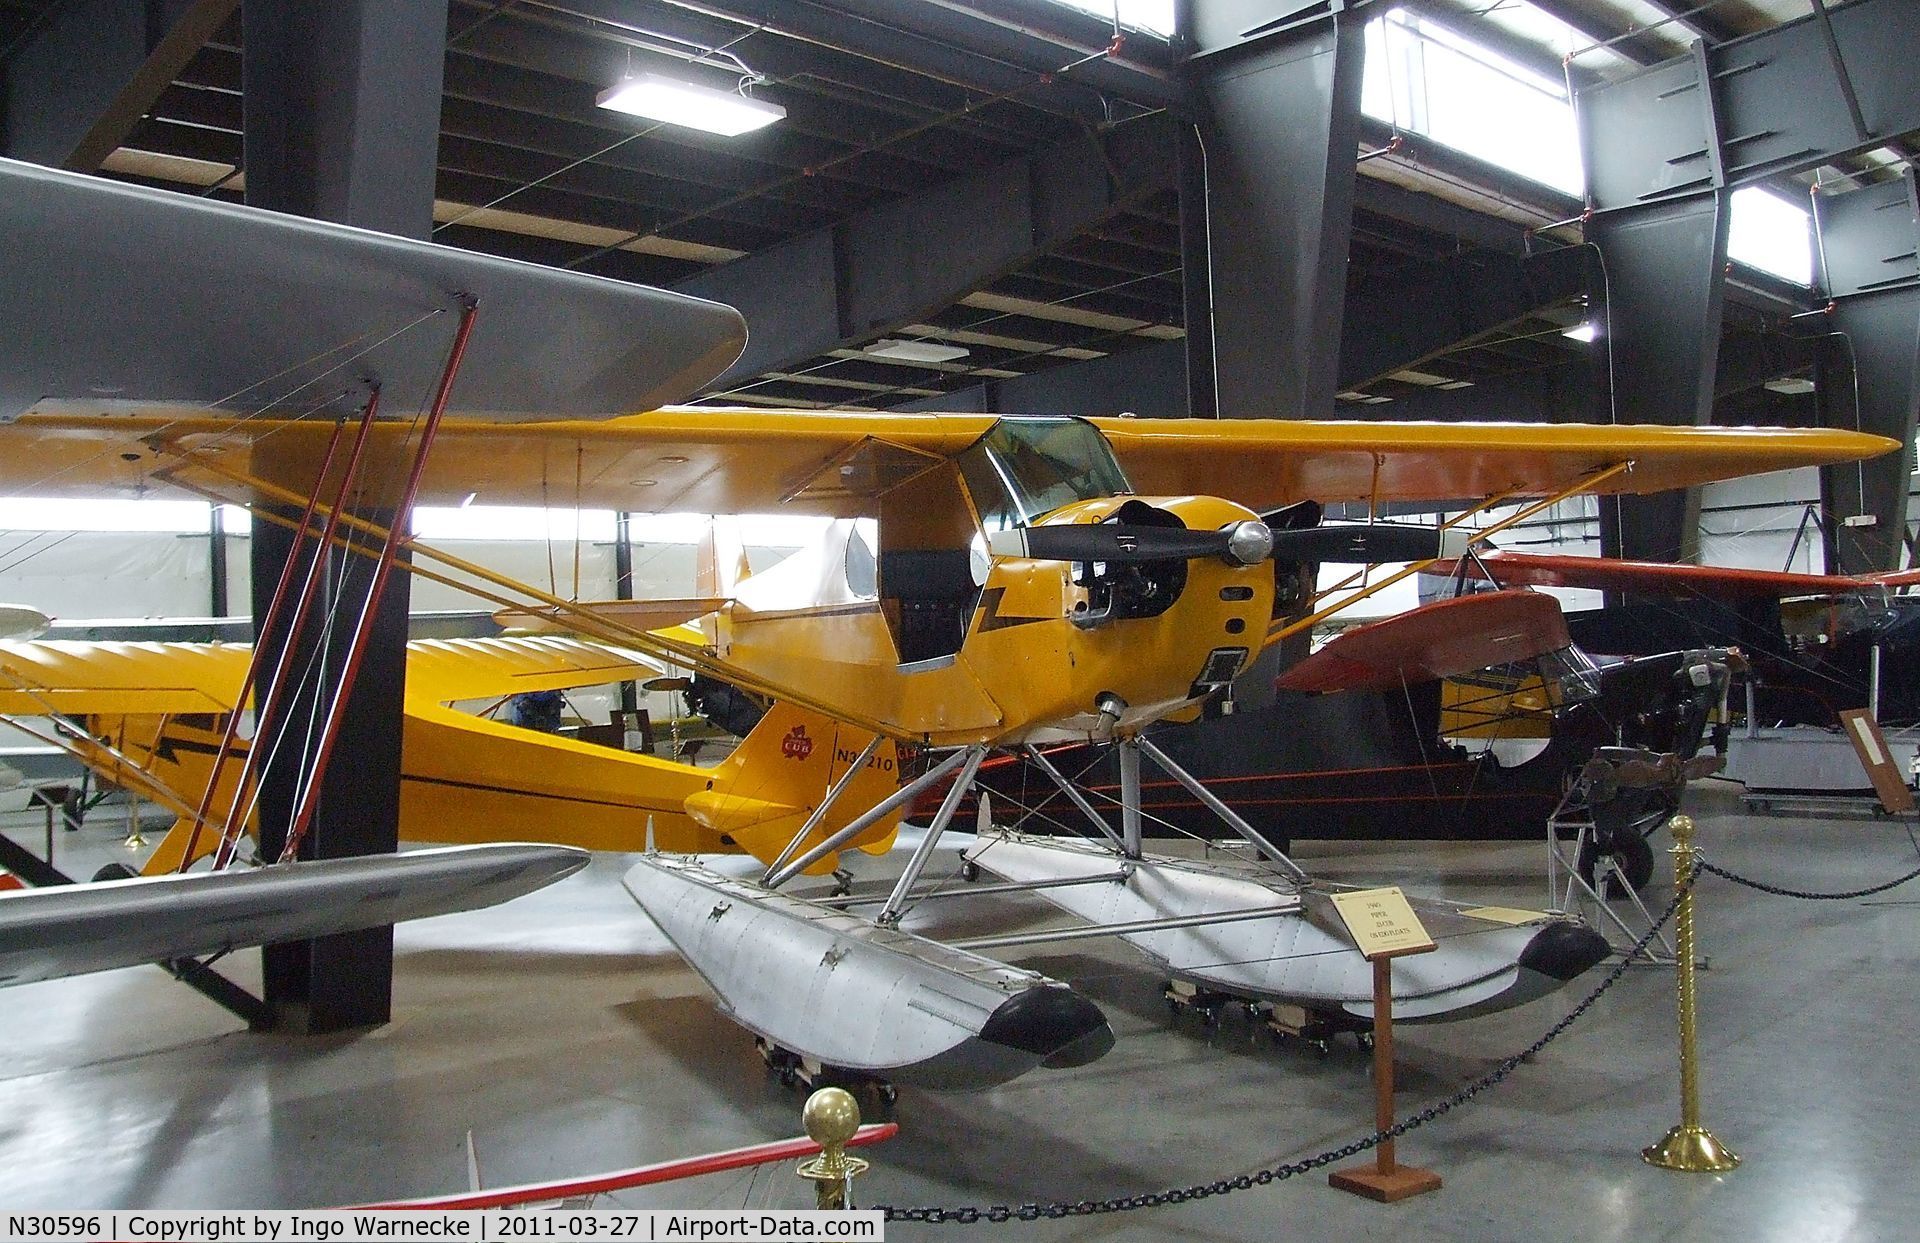 N30596, 1940 Piper J3C-65 Cub Cub C/N 4963, Piper J3C-65 Cub on floats at the Western Antique Aeroplane and Automobile Museum, Hood River OR